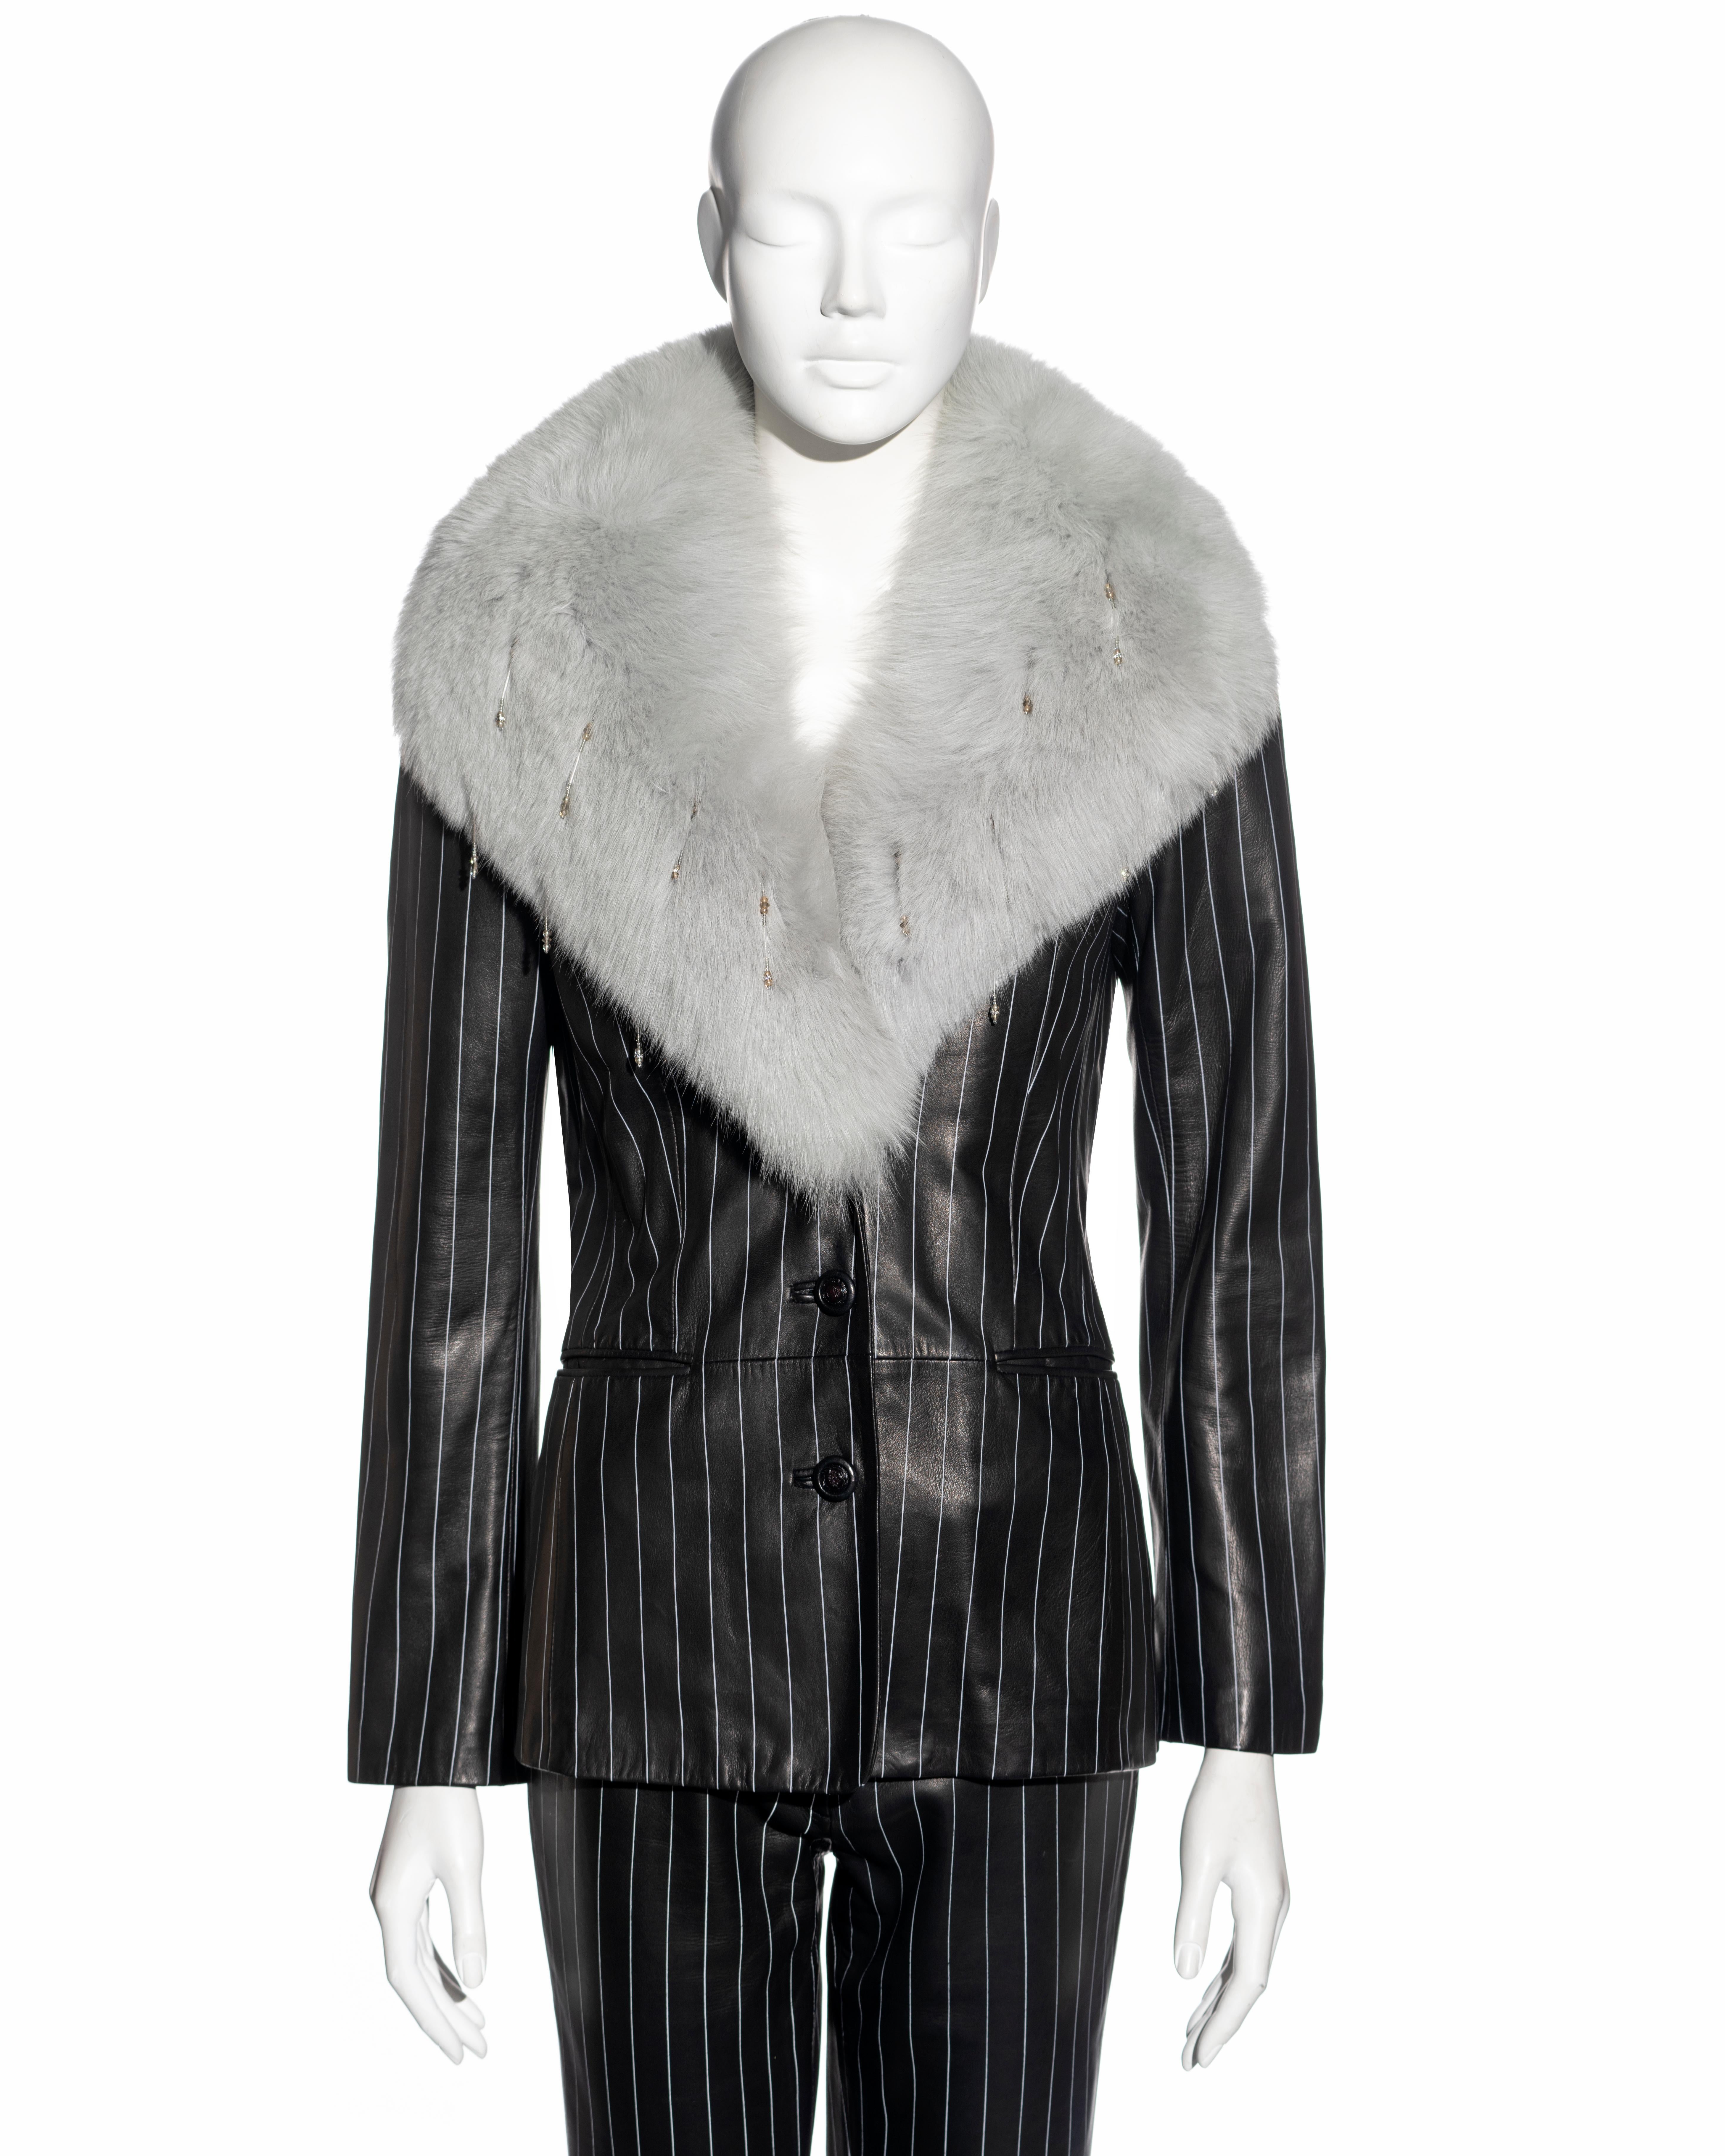 Gianni Versace black pinstripe leather and fox fur trouser suit, fw 1998 In Excellent Condition For Sale In London, GB